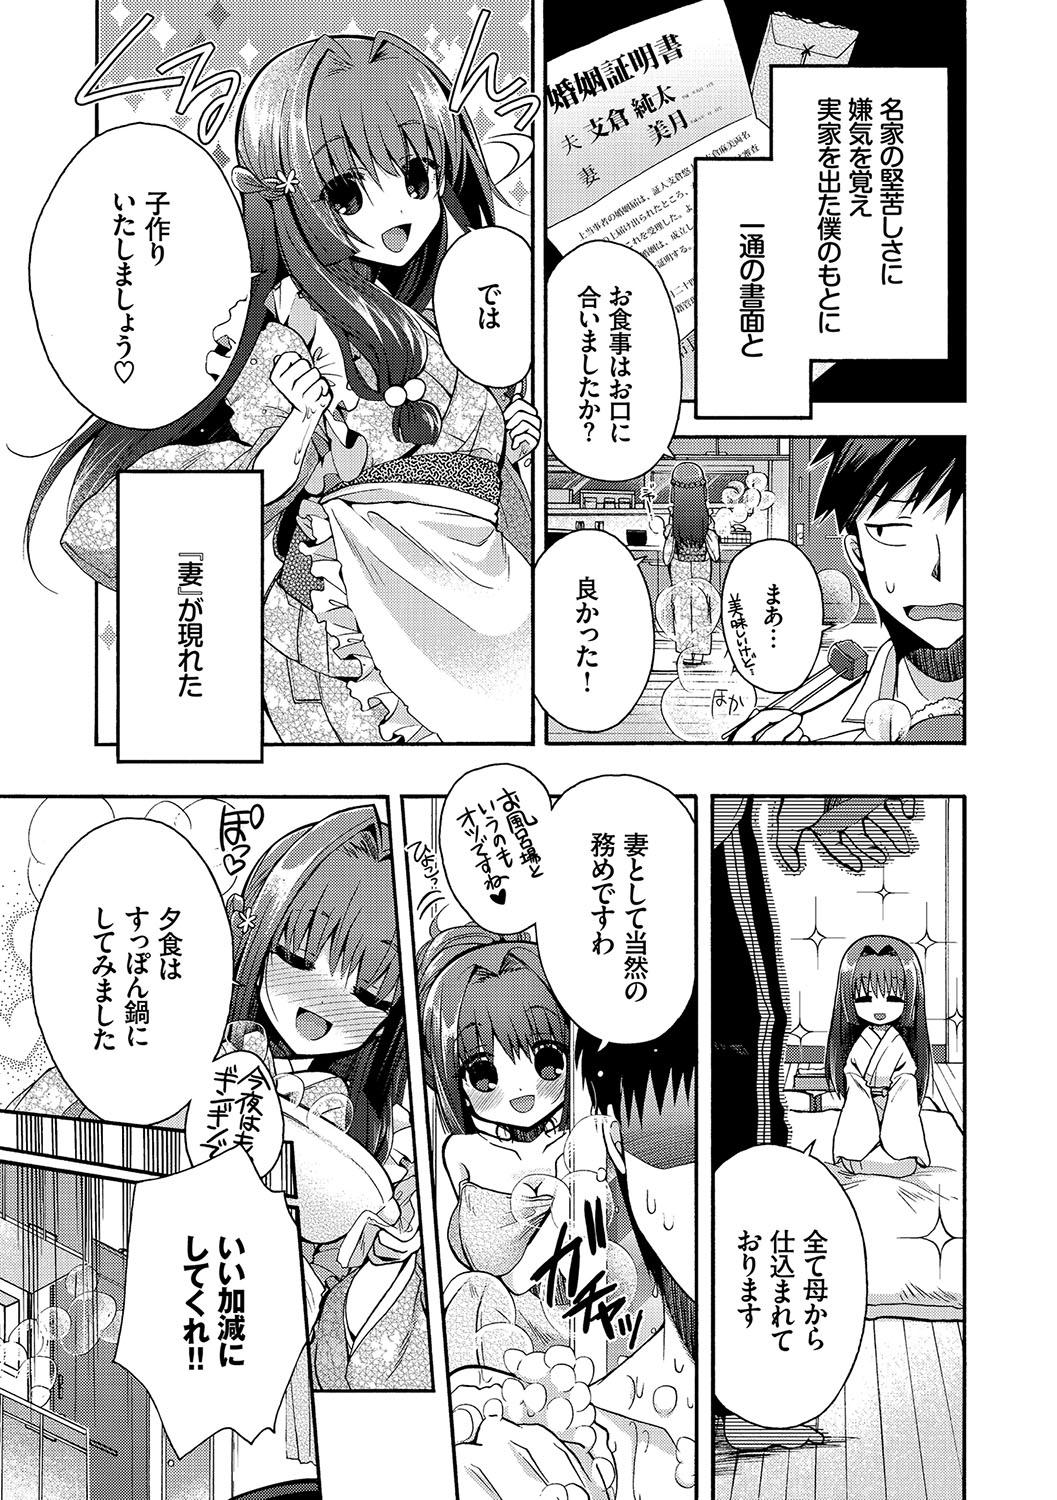 Hatsukoi Melty - Melty First Love 177